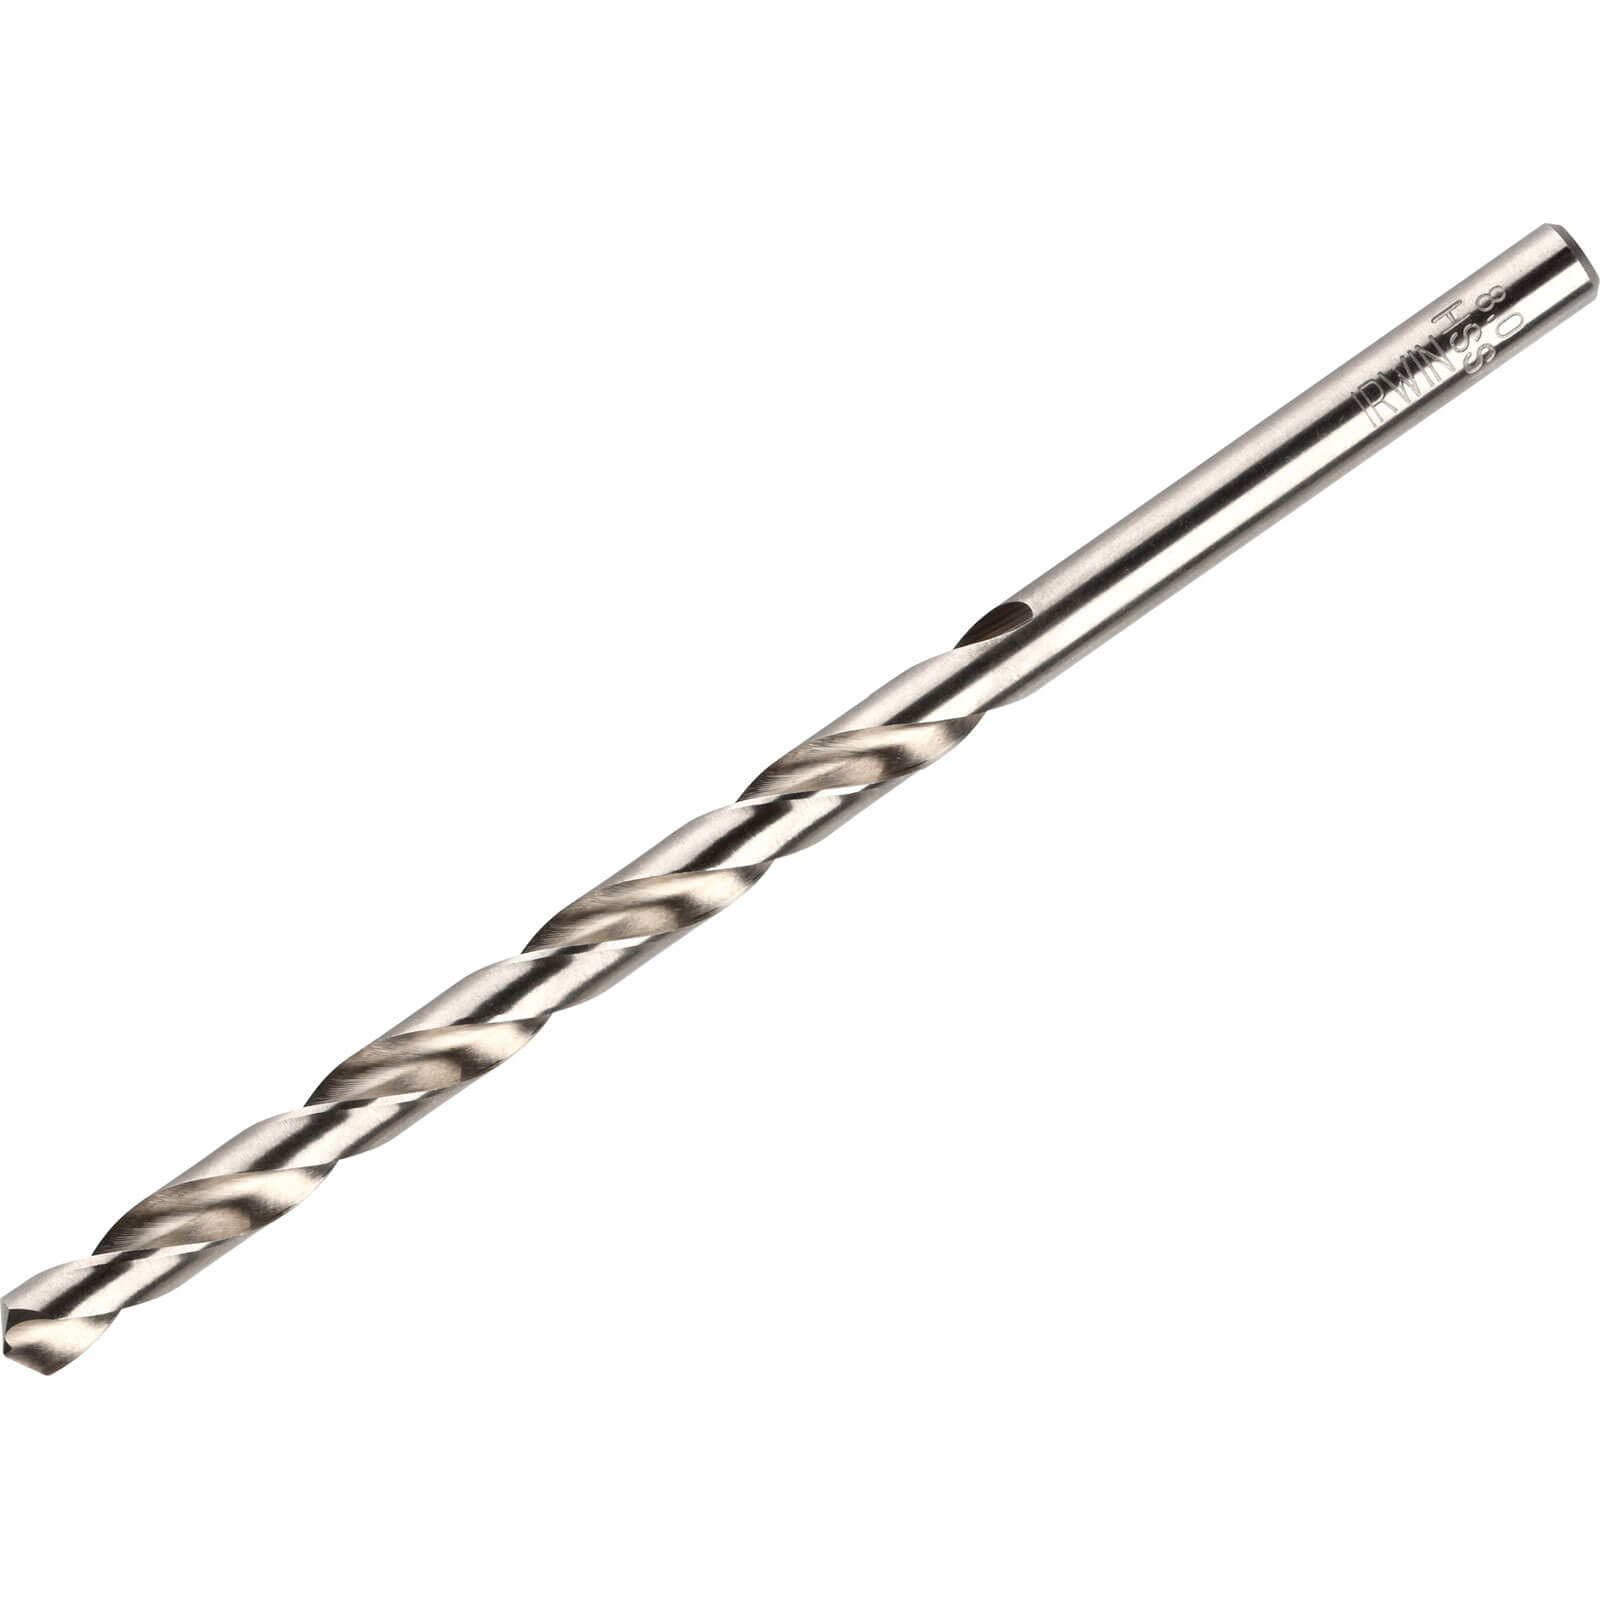 Image of Irwin HSS Long Pro Drill Bits 4mm Pack of 10